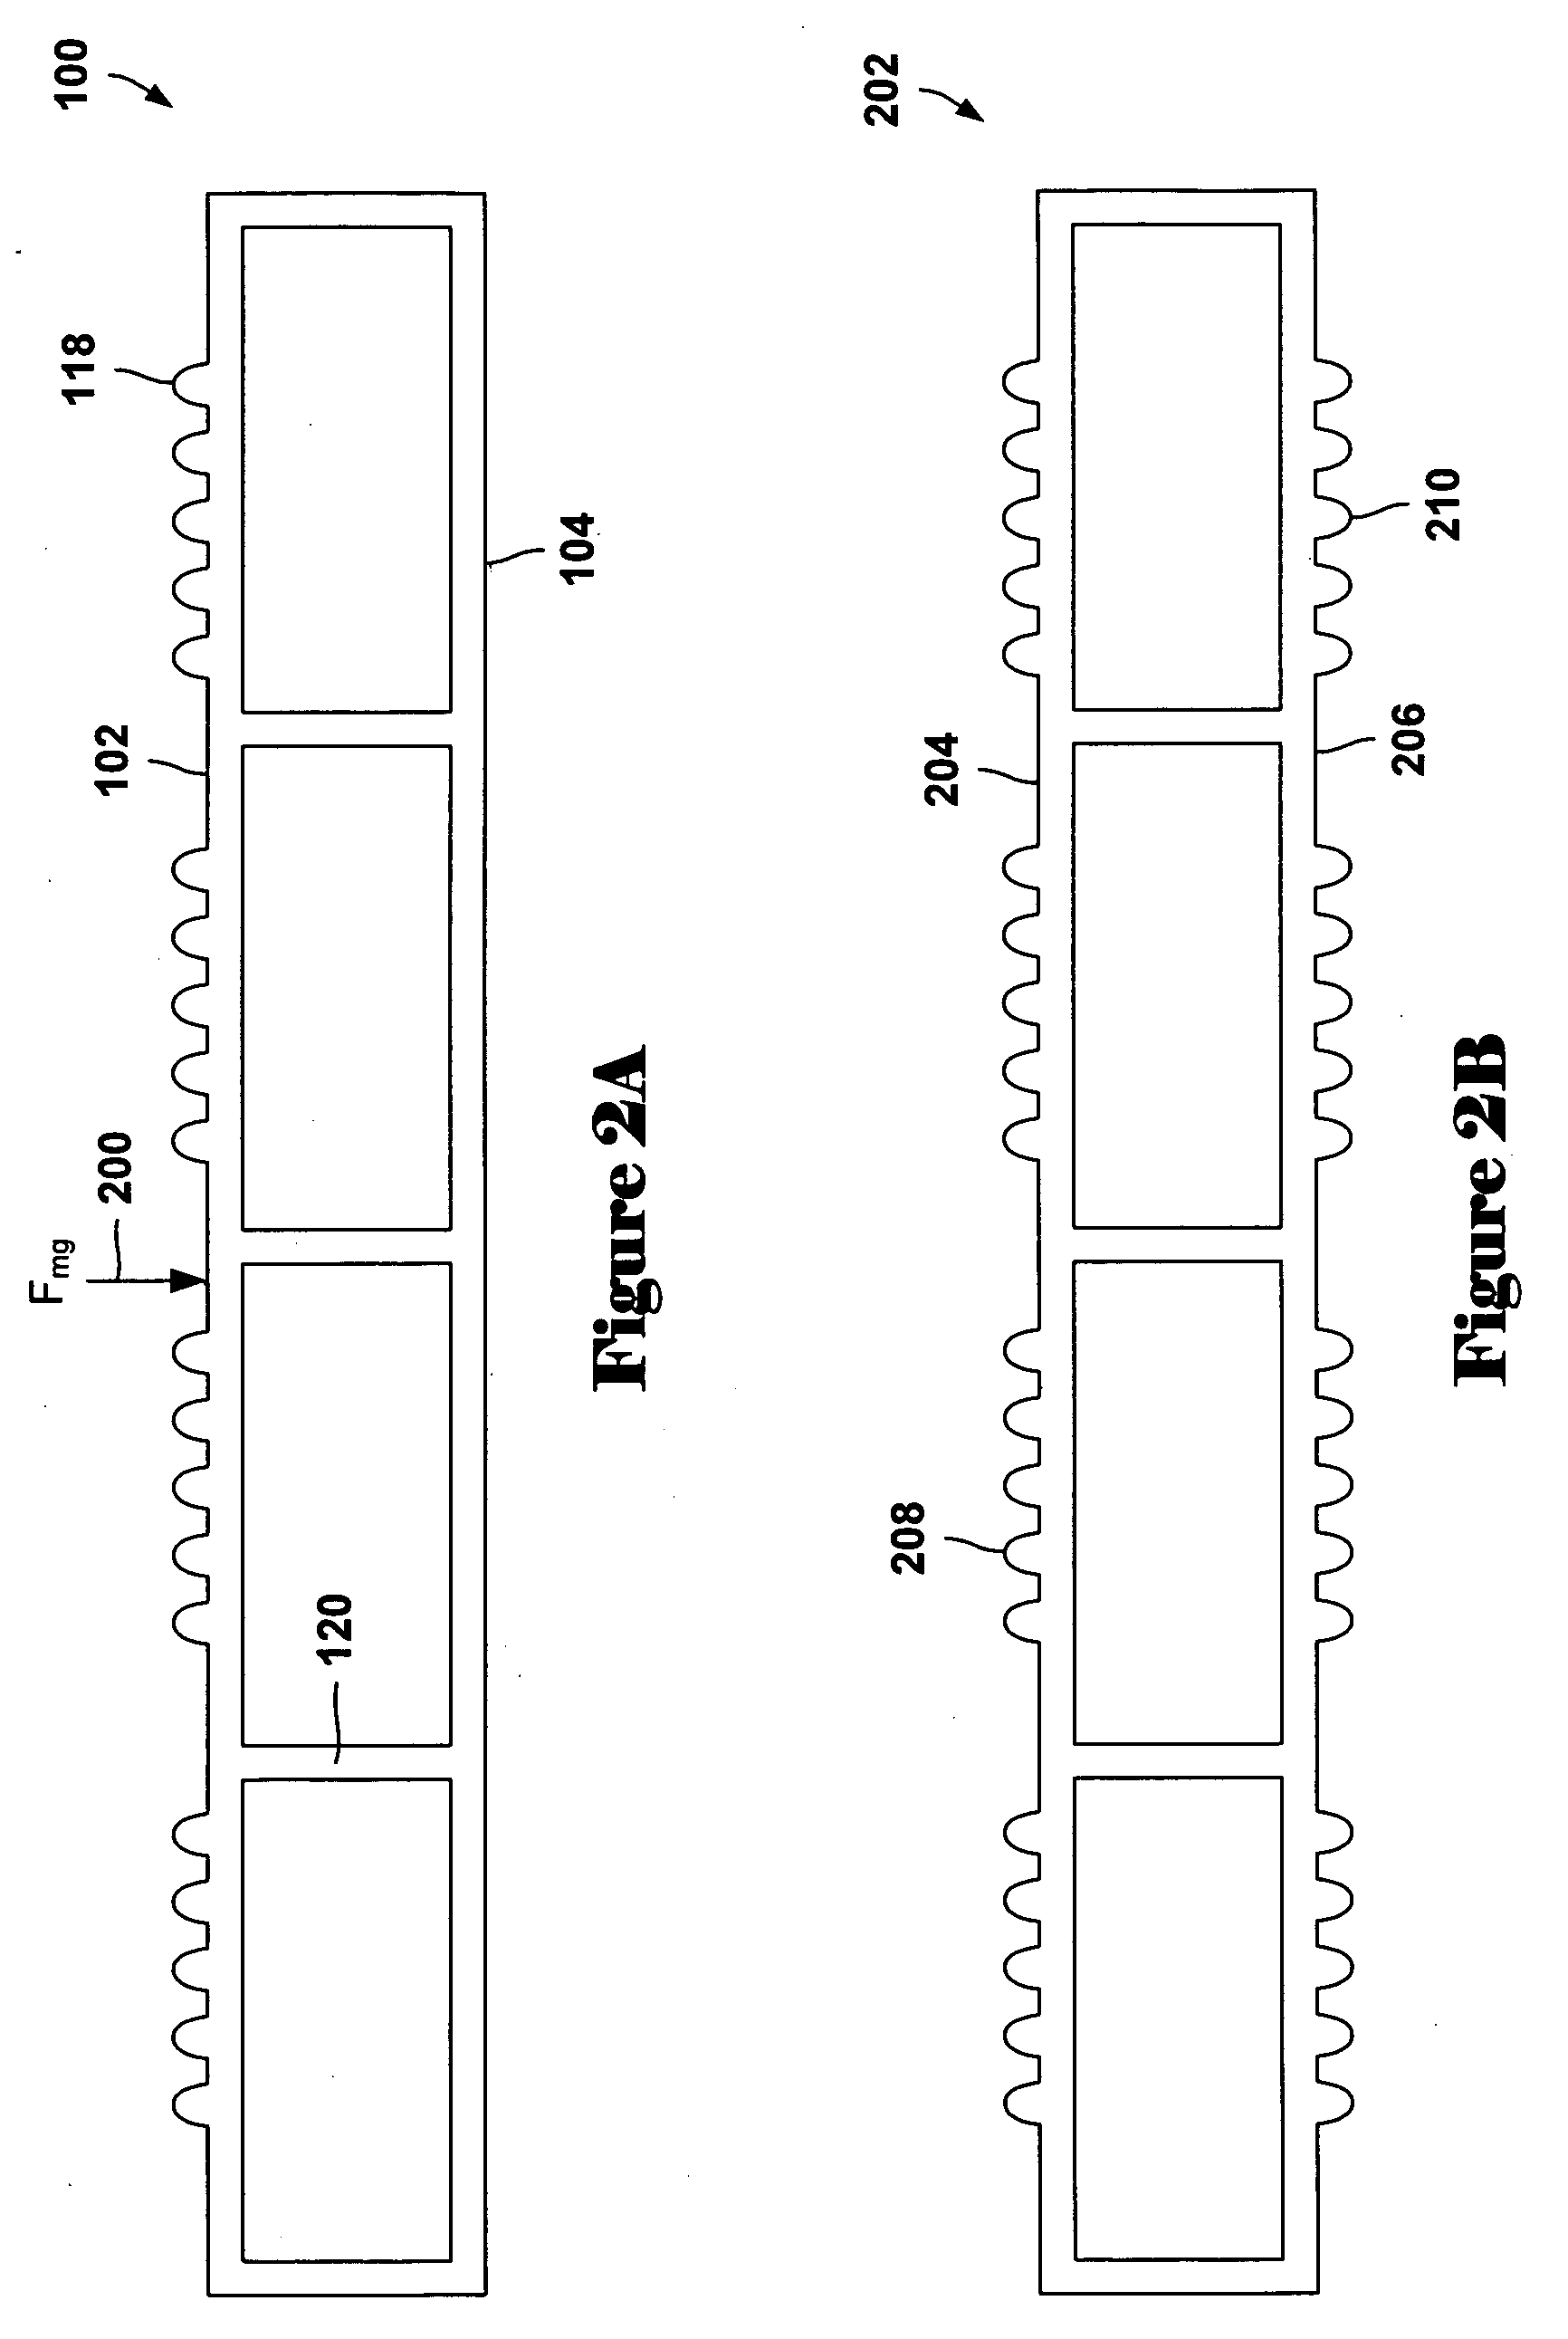 Polymer-based handicap ramping system and method of shipping and construction of same